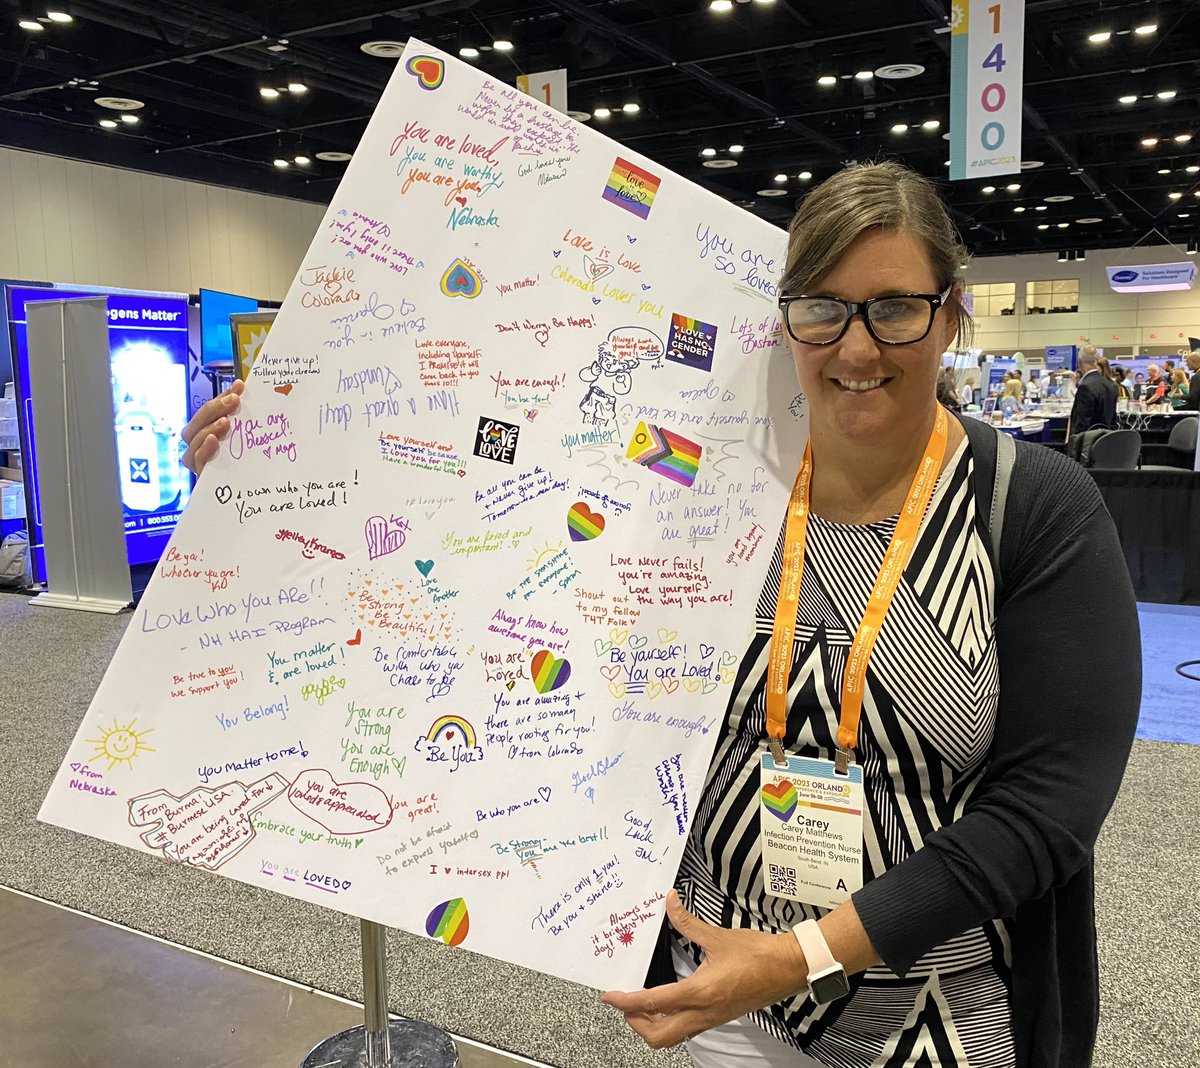 Strong signs of support from #APIC2023 conference goers for the #LGBT community in #Orlando. #TheCenter and #ZebraYouth are the beneficiaries of hundreds of hygiene items, cards, bracelets and donations. Thanks #APIC!